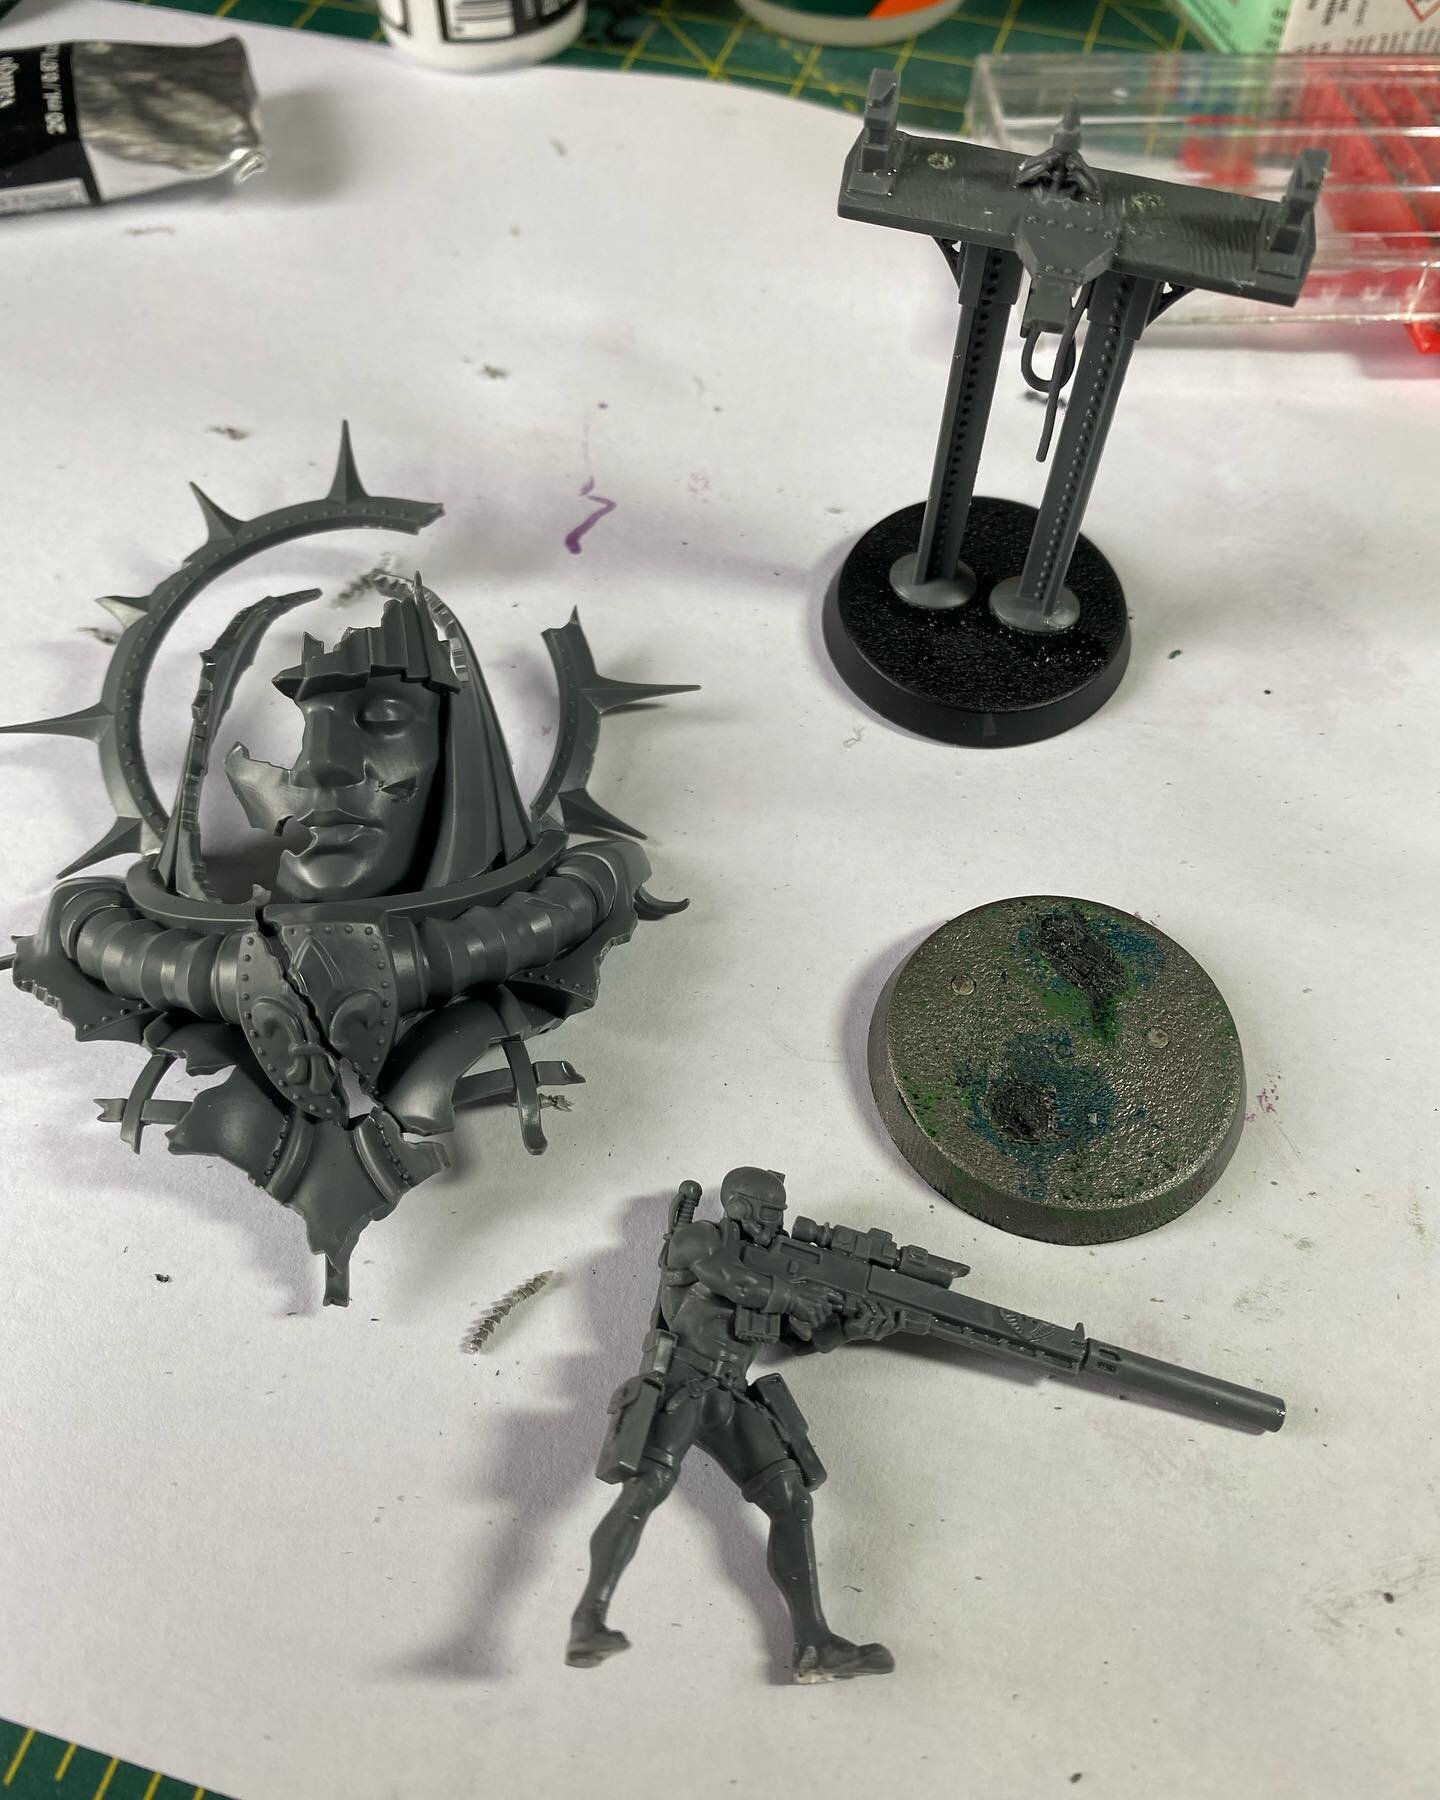 We&rsquo;re not dead! I was at first disappointed that the #vindicareassassin from #operativeumbralsix was mounded to the scenic base&hellip;and then I remembered that magnets are a thing!

Pondering black synskin vs adaptive camo to patch the terrai